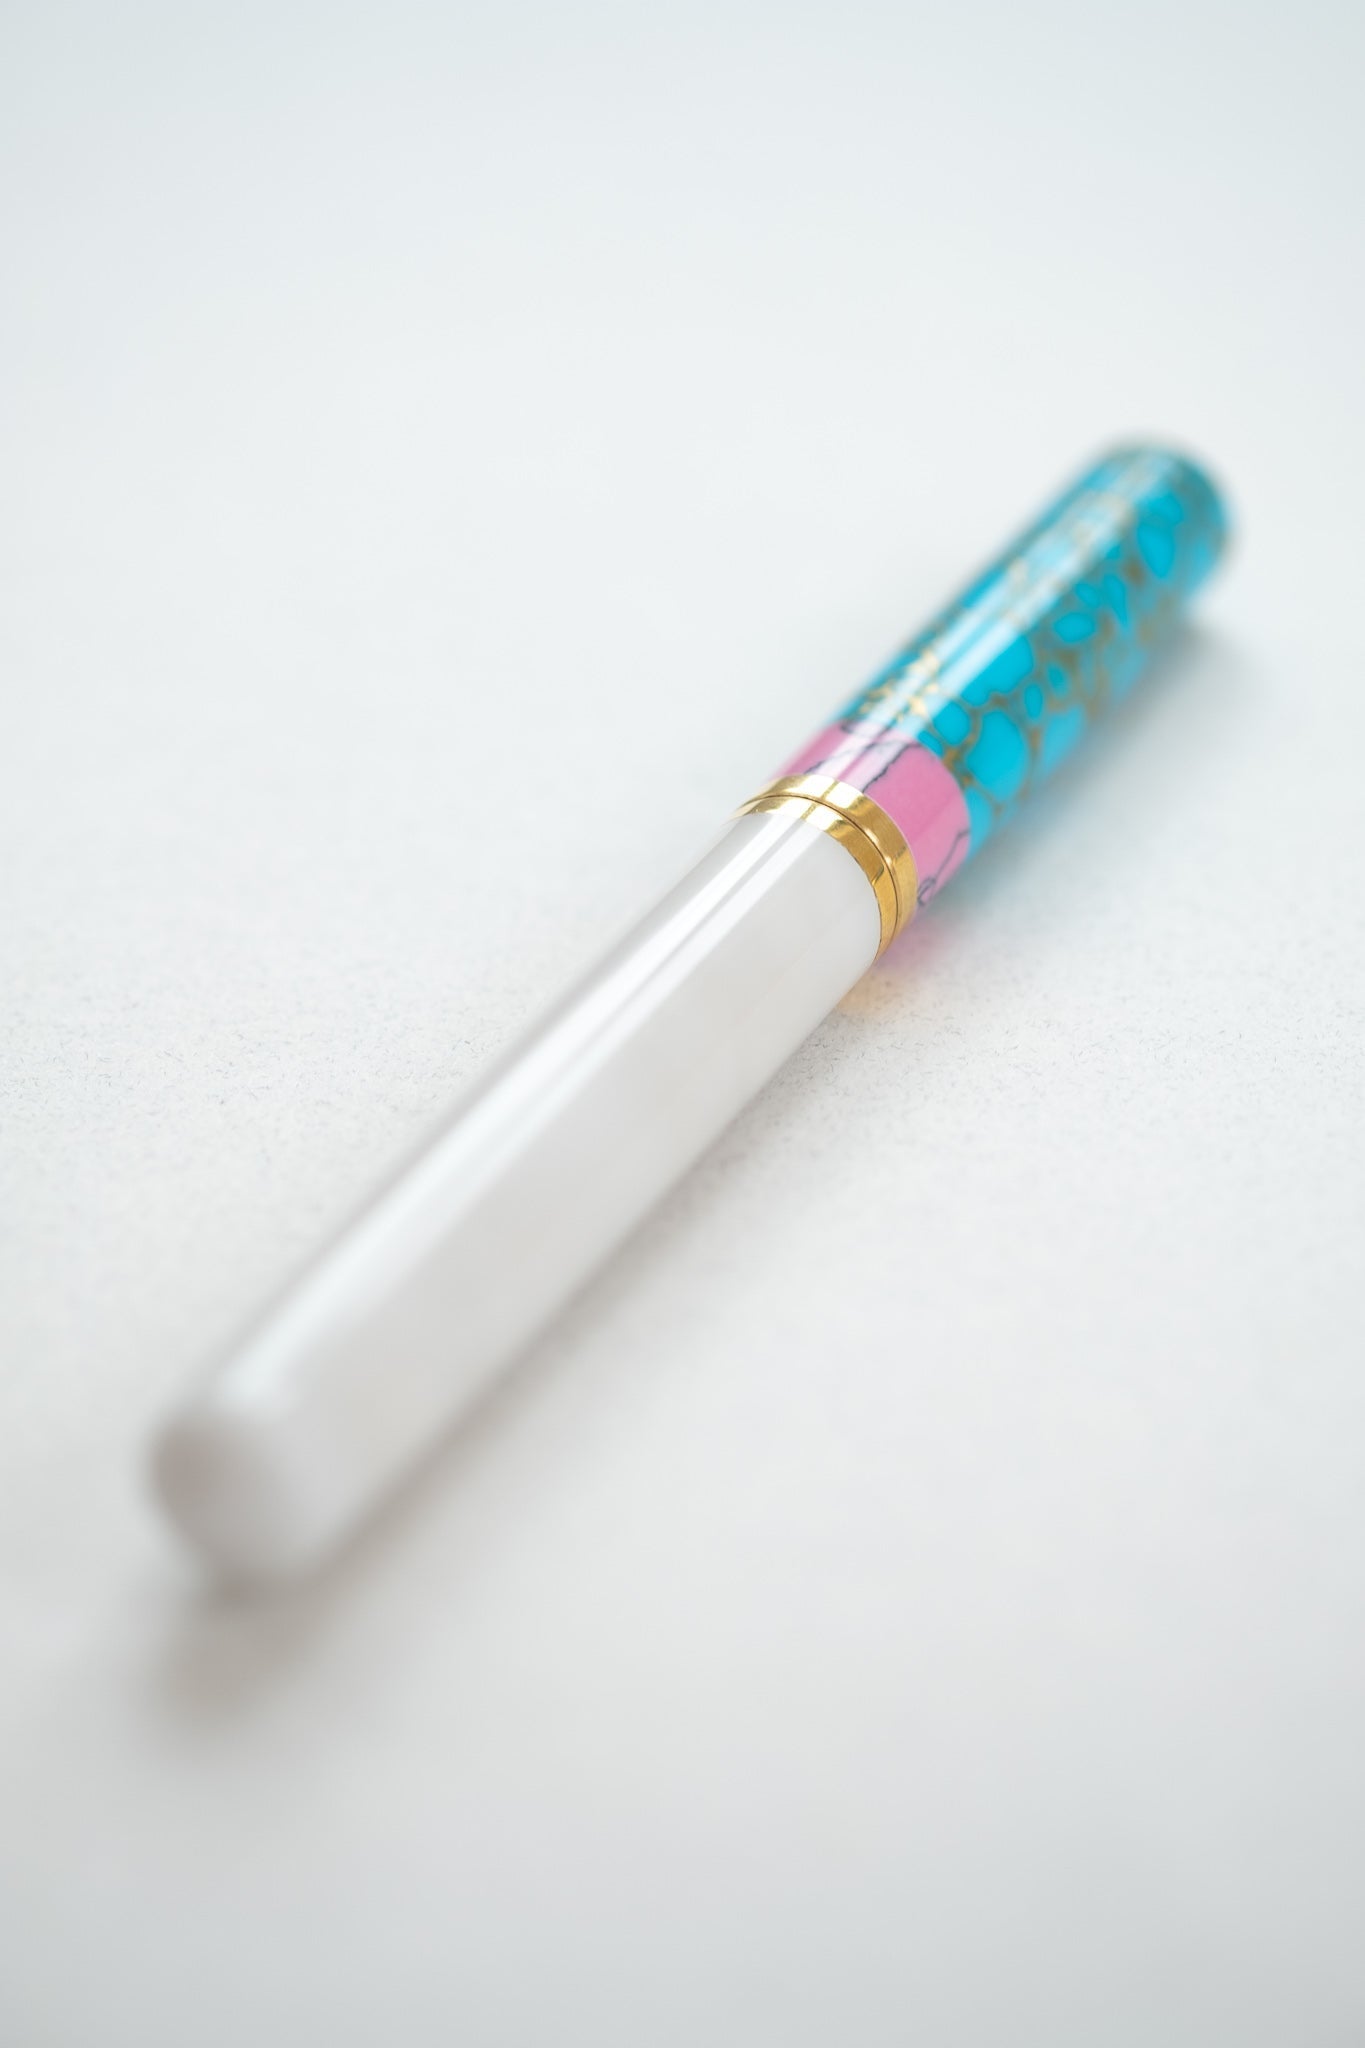 Pink + Turquoise Studio Fountain Pen close up on a white desk